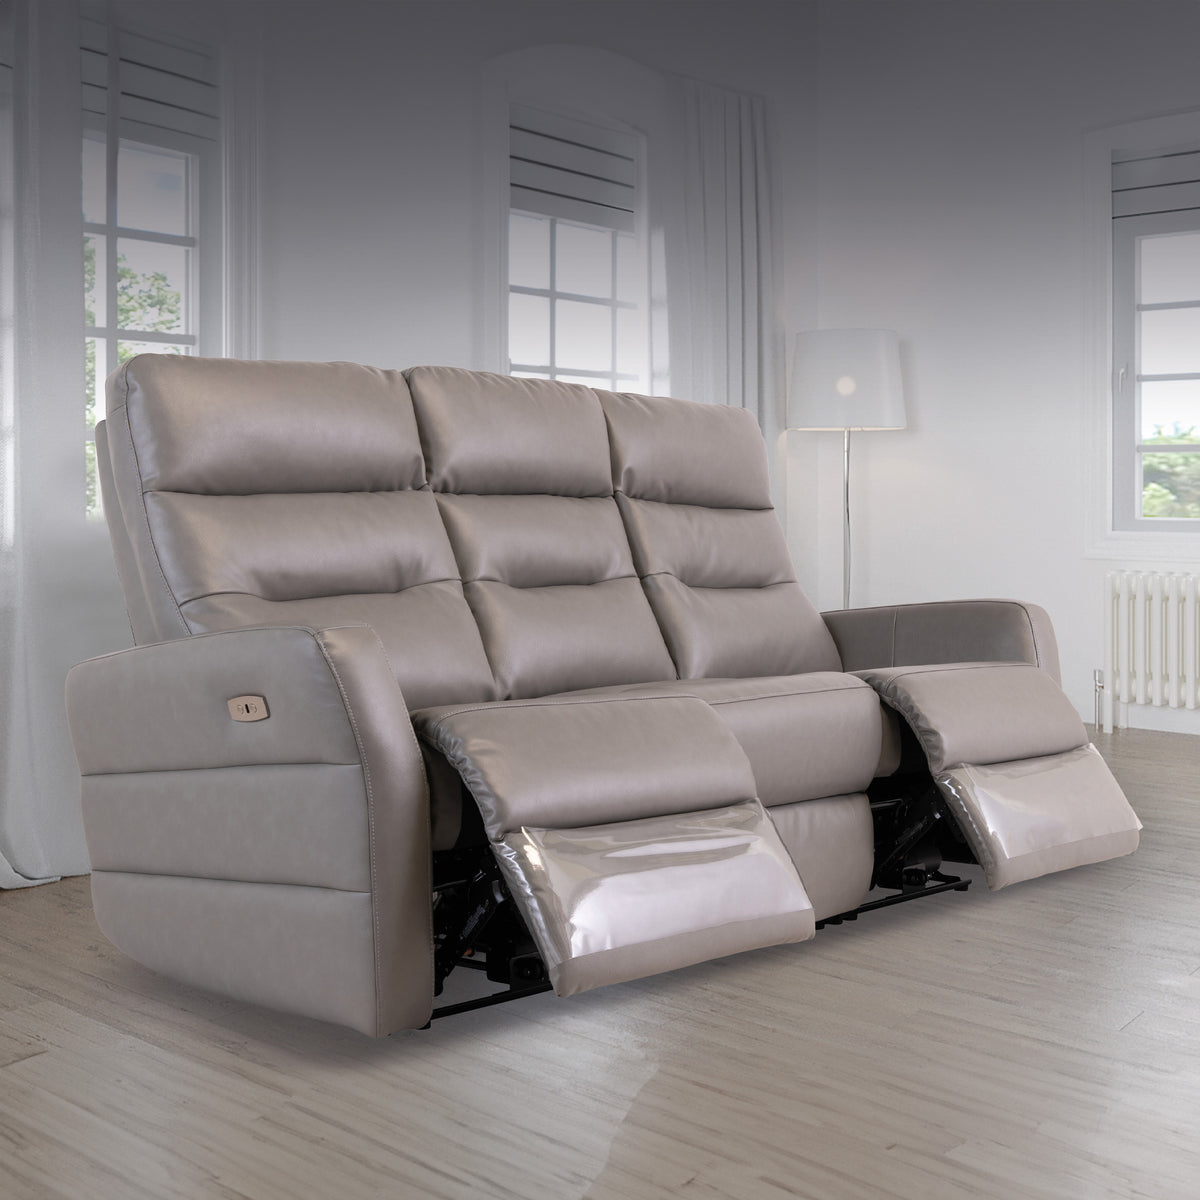 Harlem Grey Leather Electric Reclining 3 Seater Sofa for living room